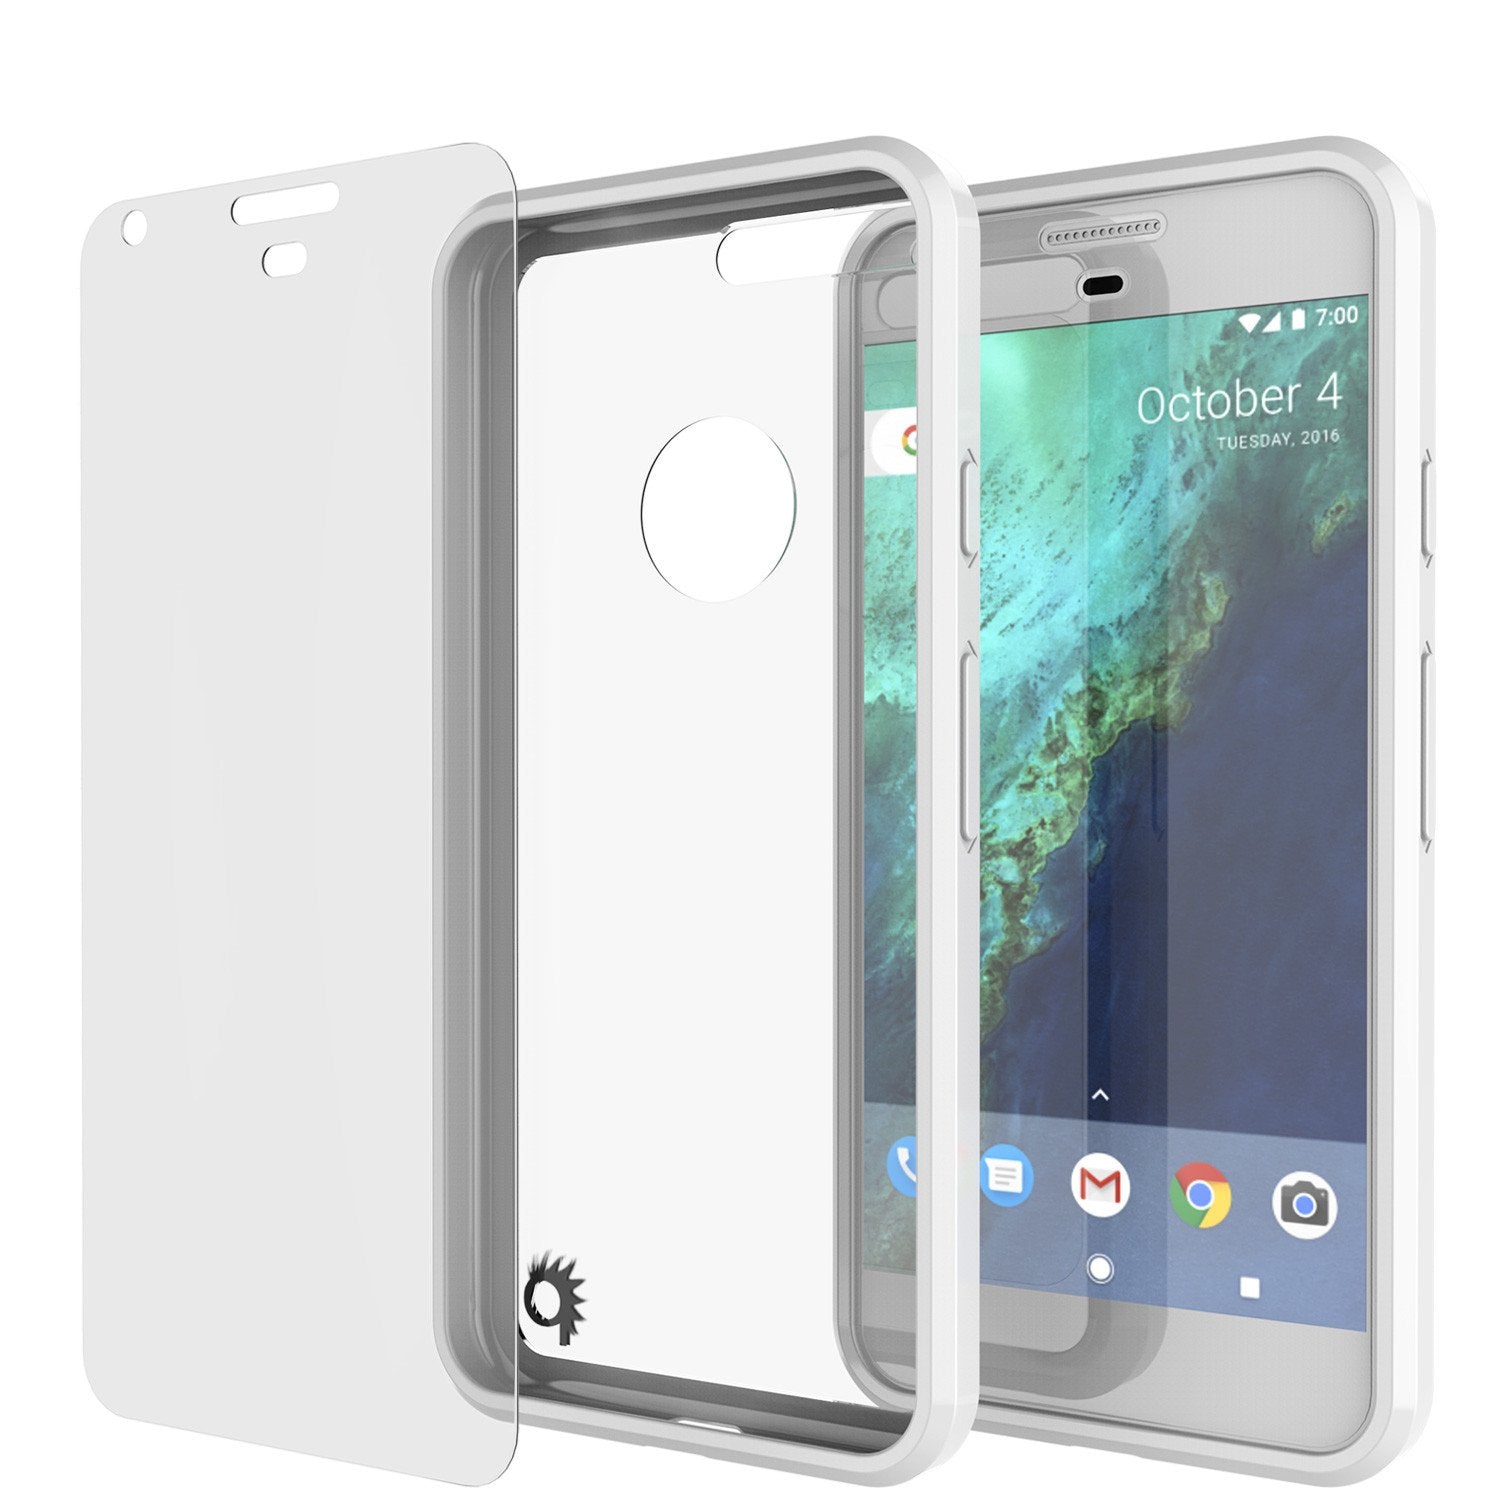 Google Pixel Case Punkcase® LUCID 2.0 White Series w/ PUNK SHIELD Glass Screen Protector | Ultra Fit - PunkCase NZ